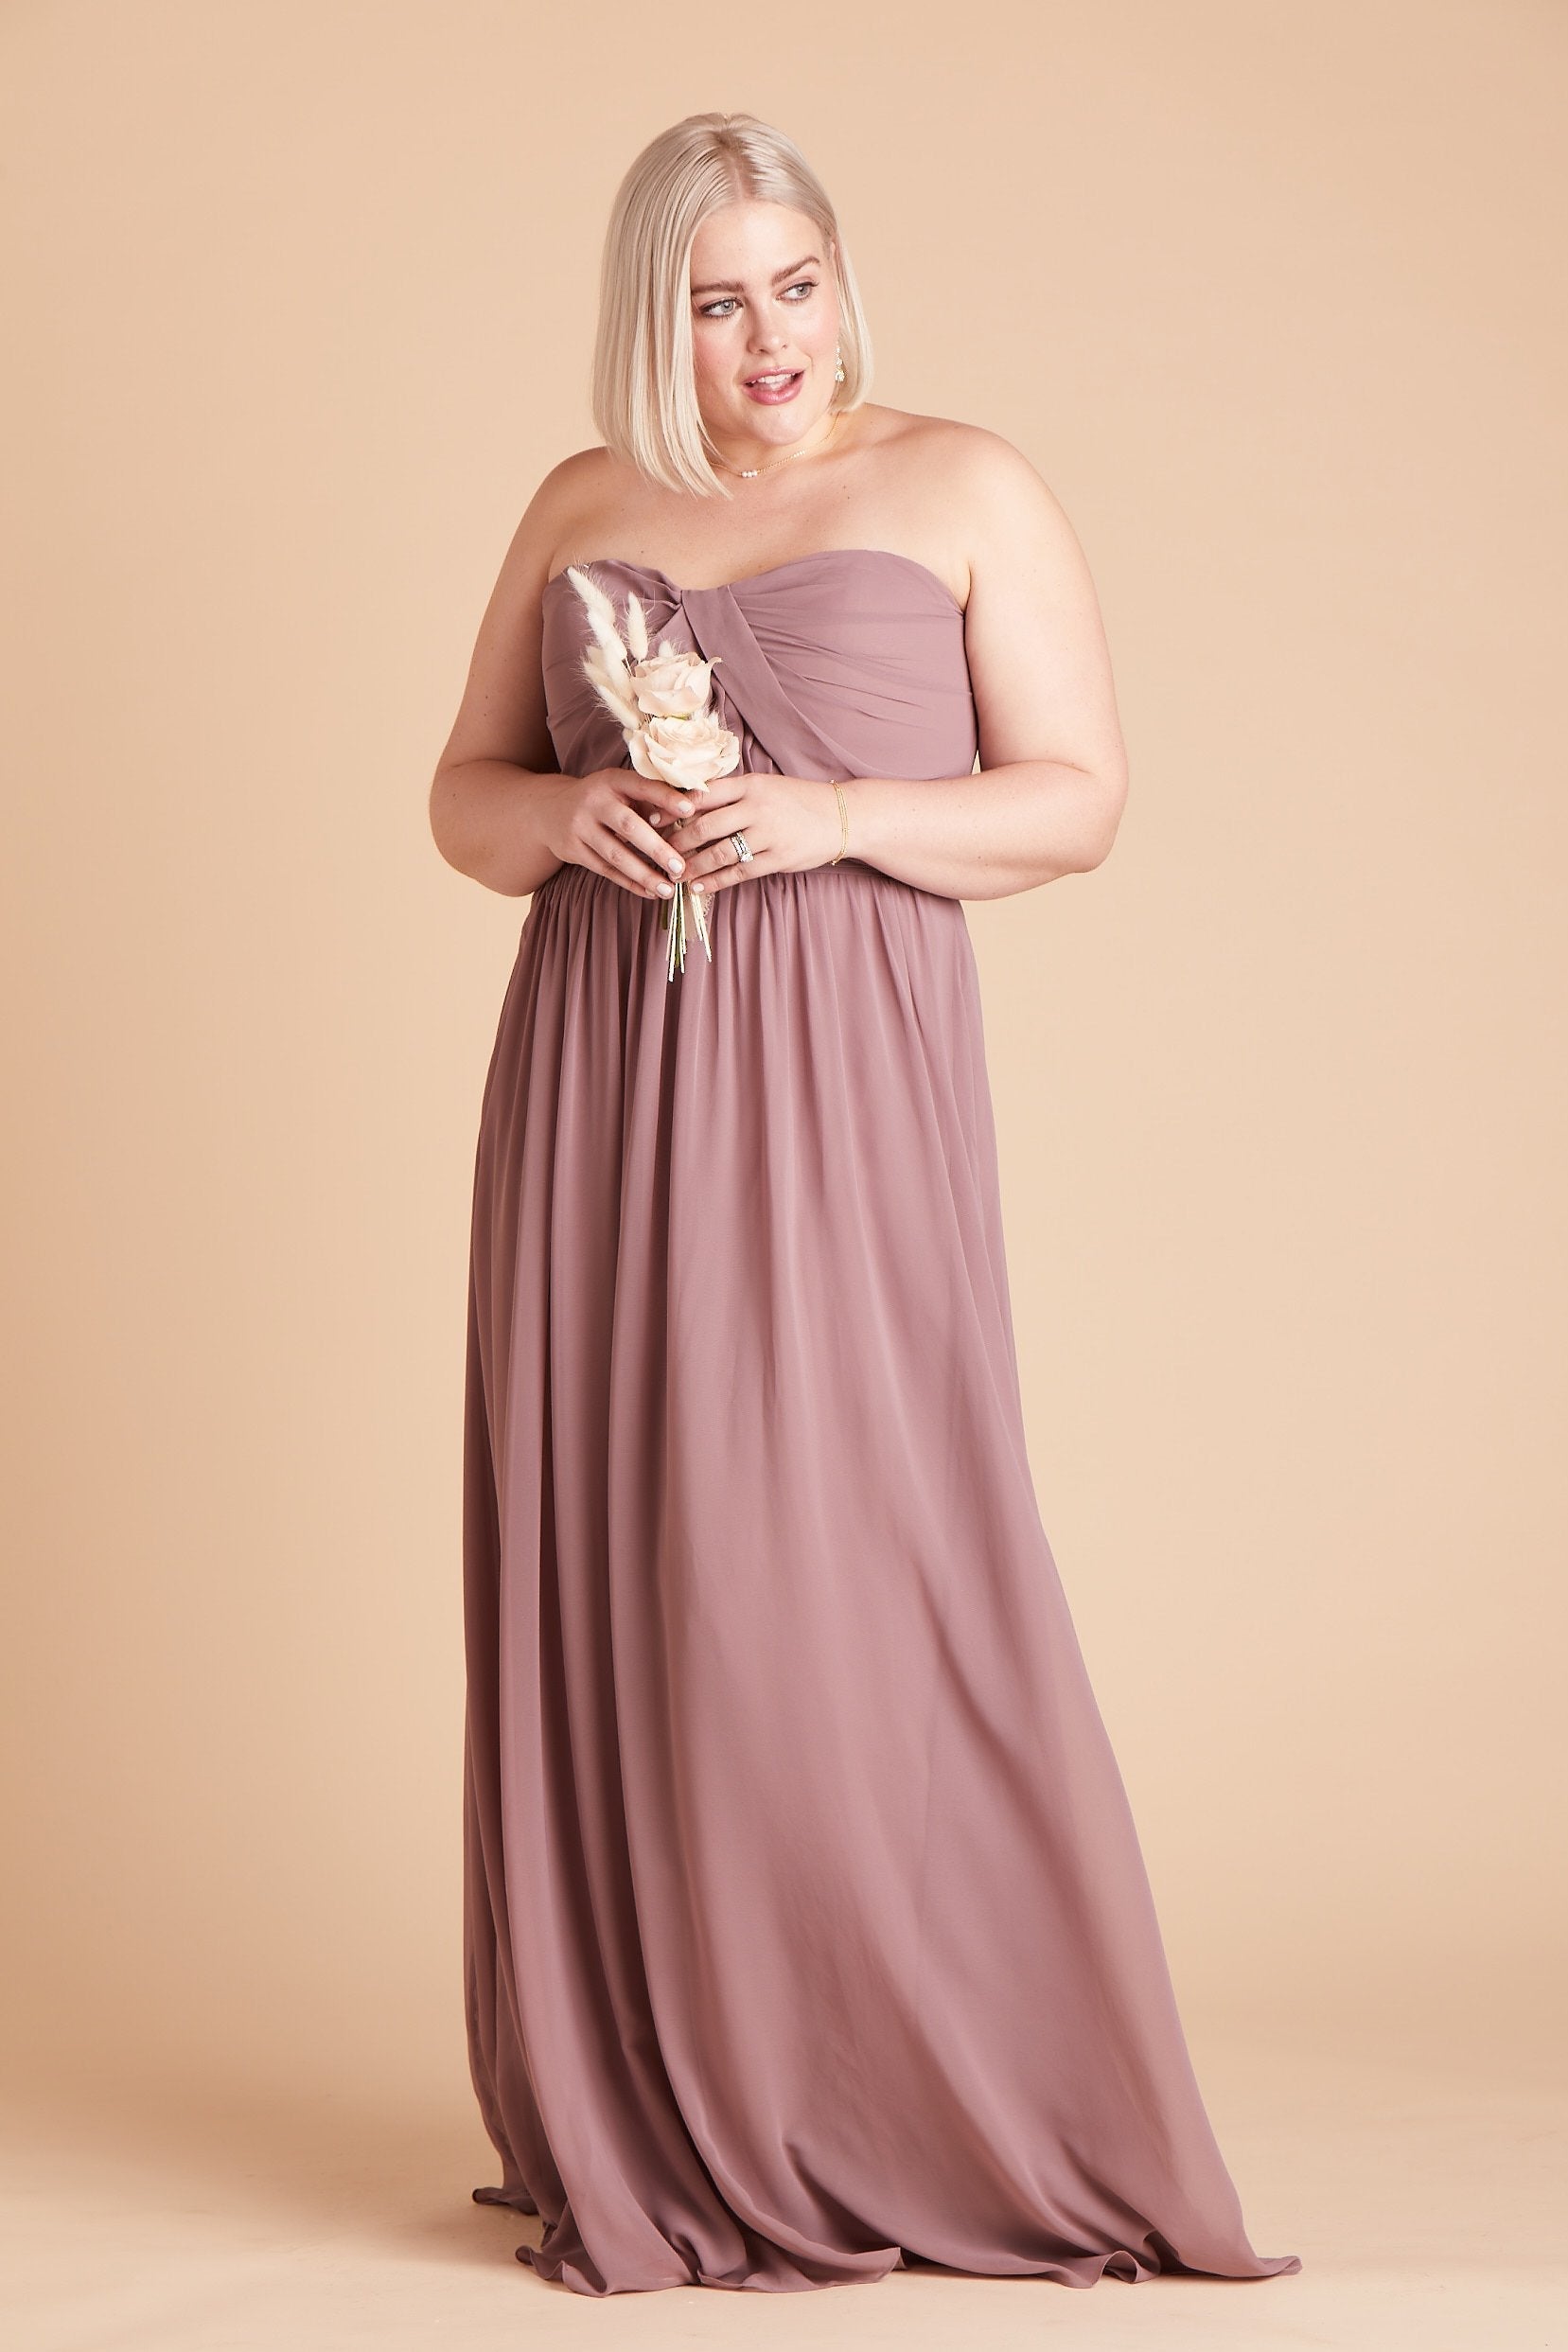 Grace convertible plus size bridesmaid dress in dark mauve chiffon by Birdy Grey, front view